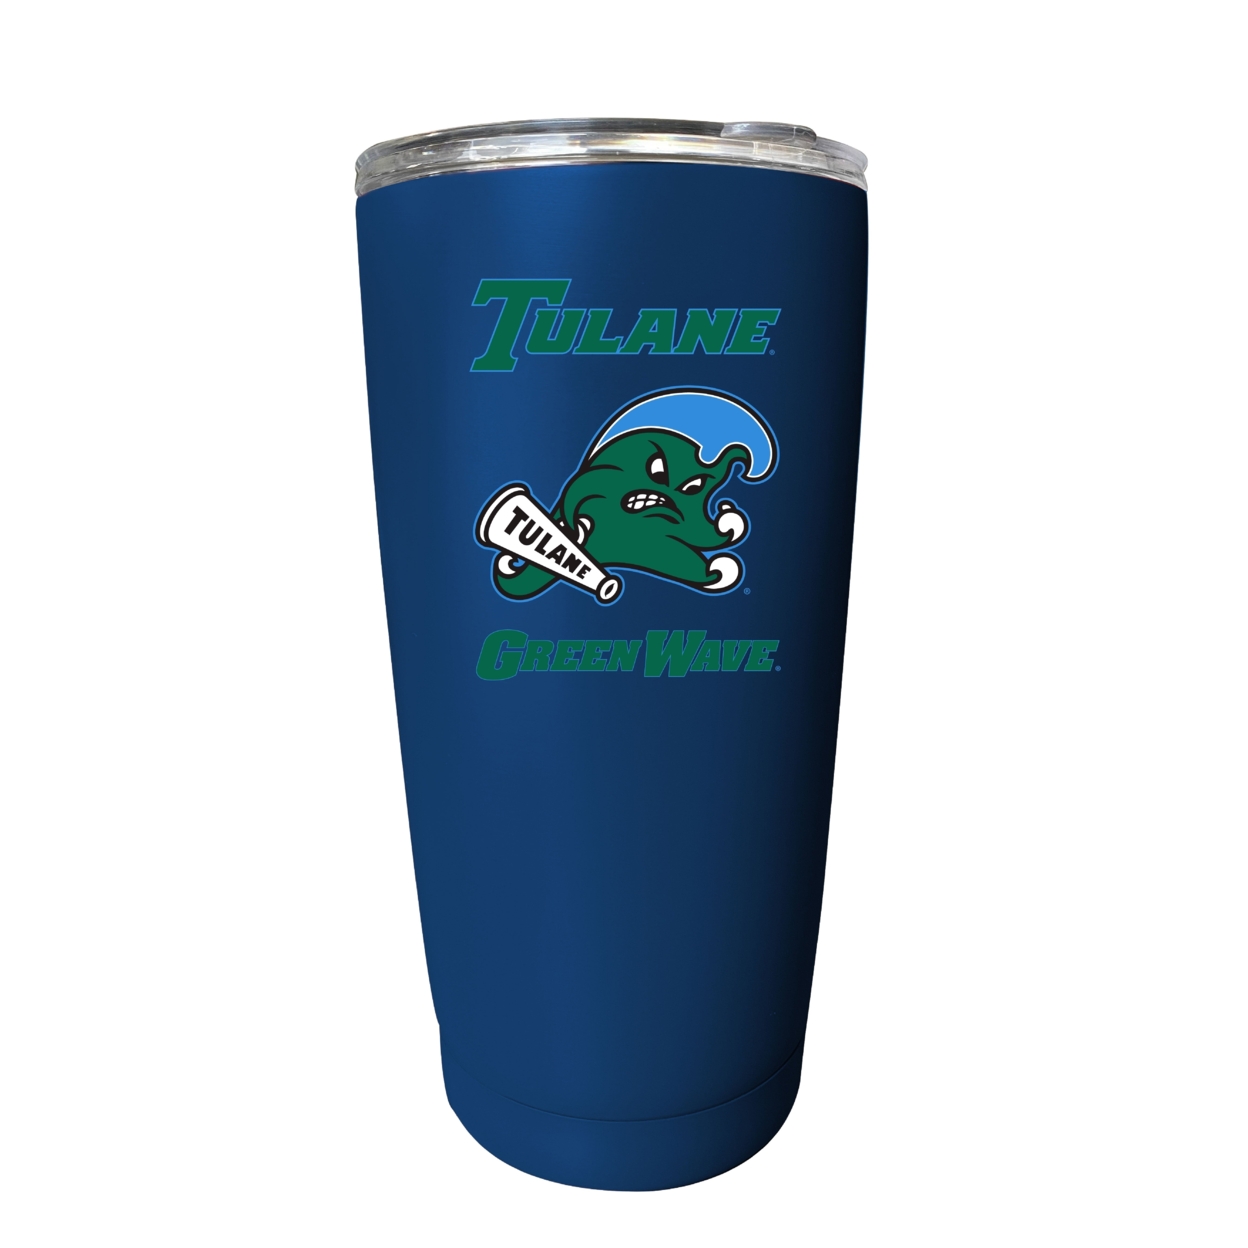 Tulane University Green Wave 16 Oz Insulated Stainless Steel Tumbler - Choose Your Color. - Navy